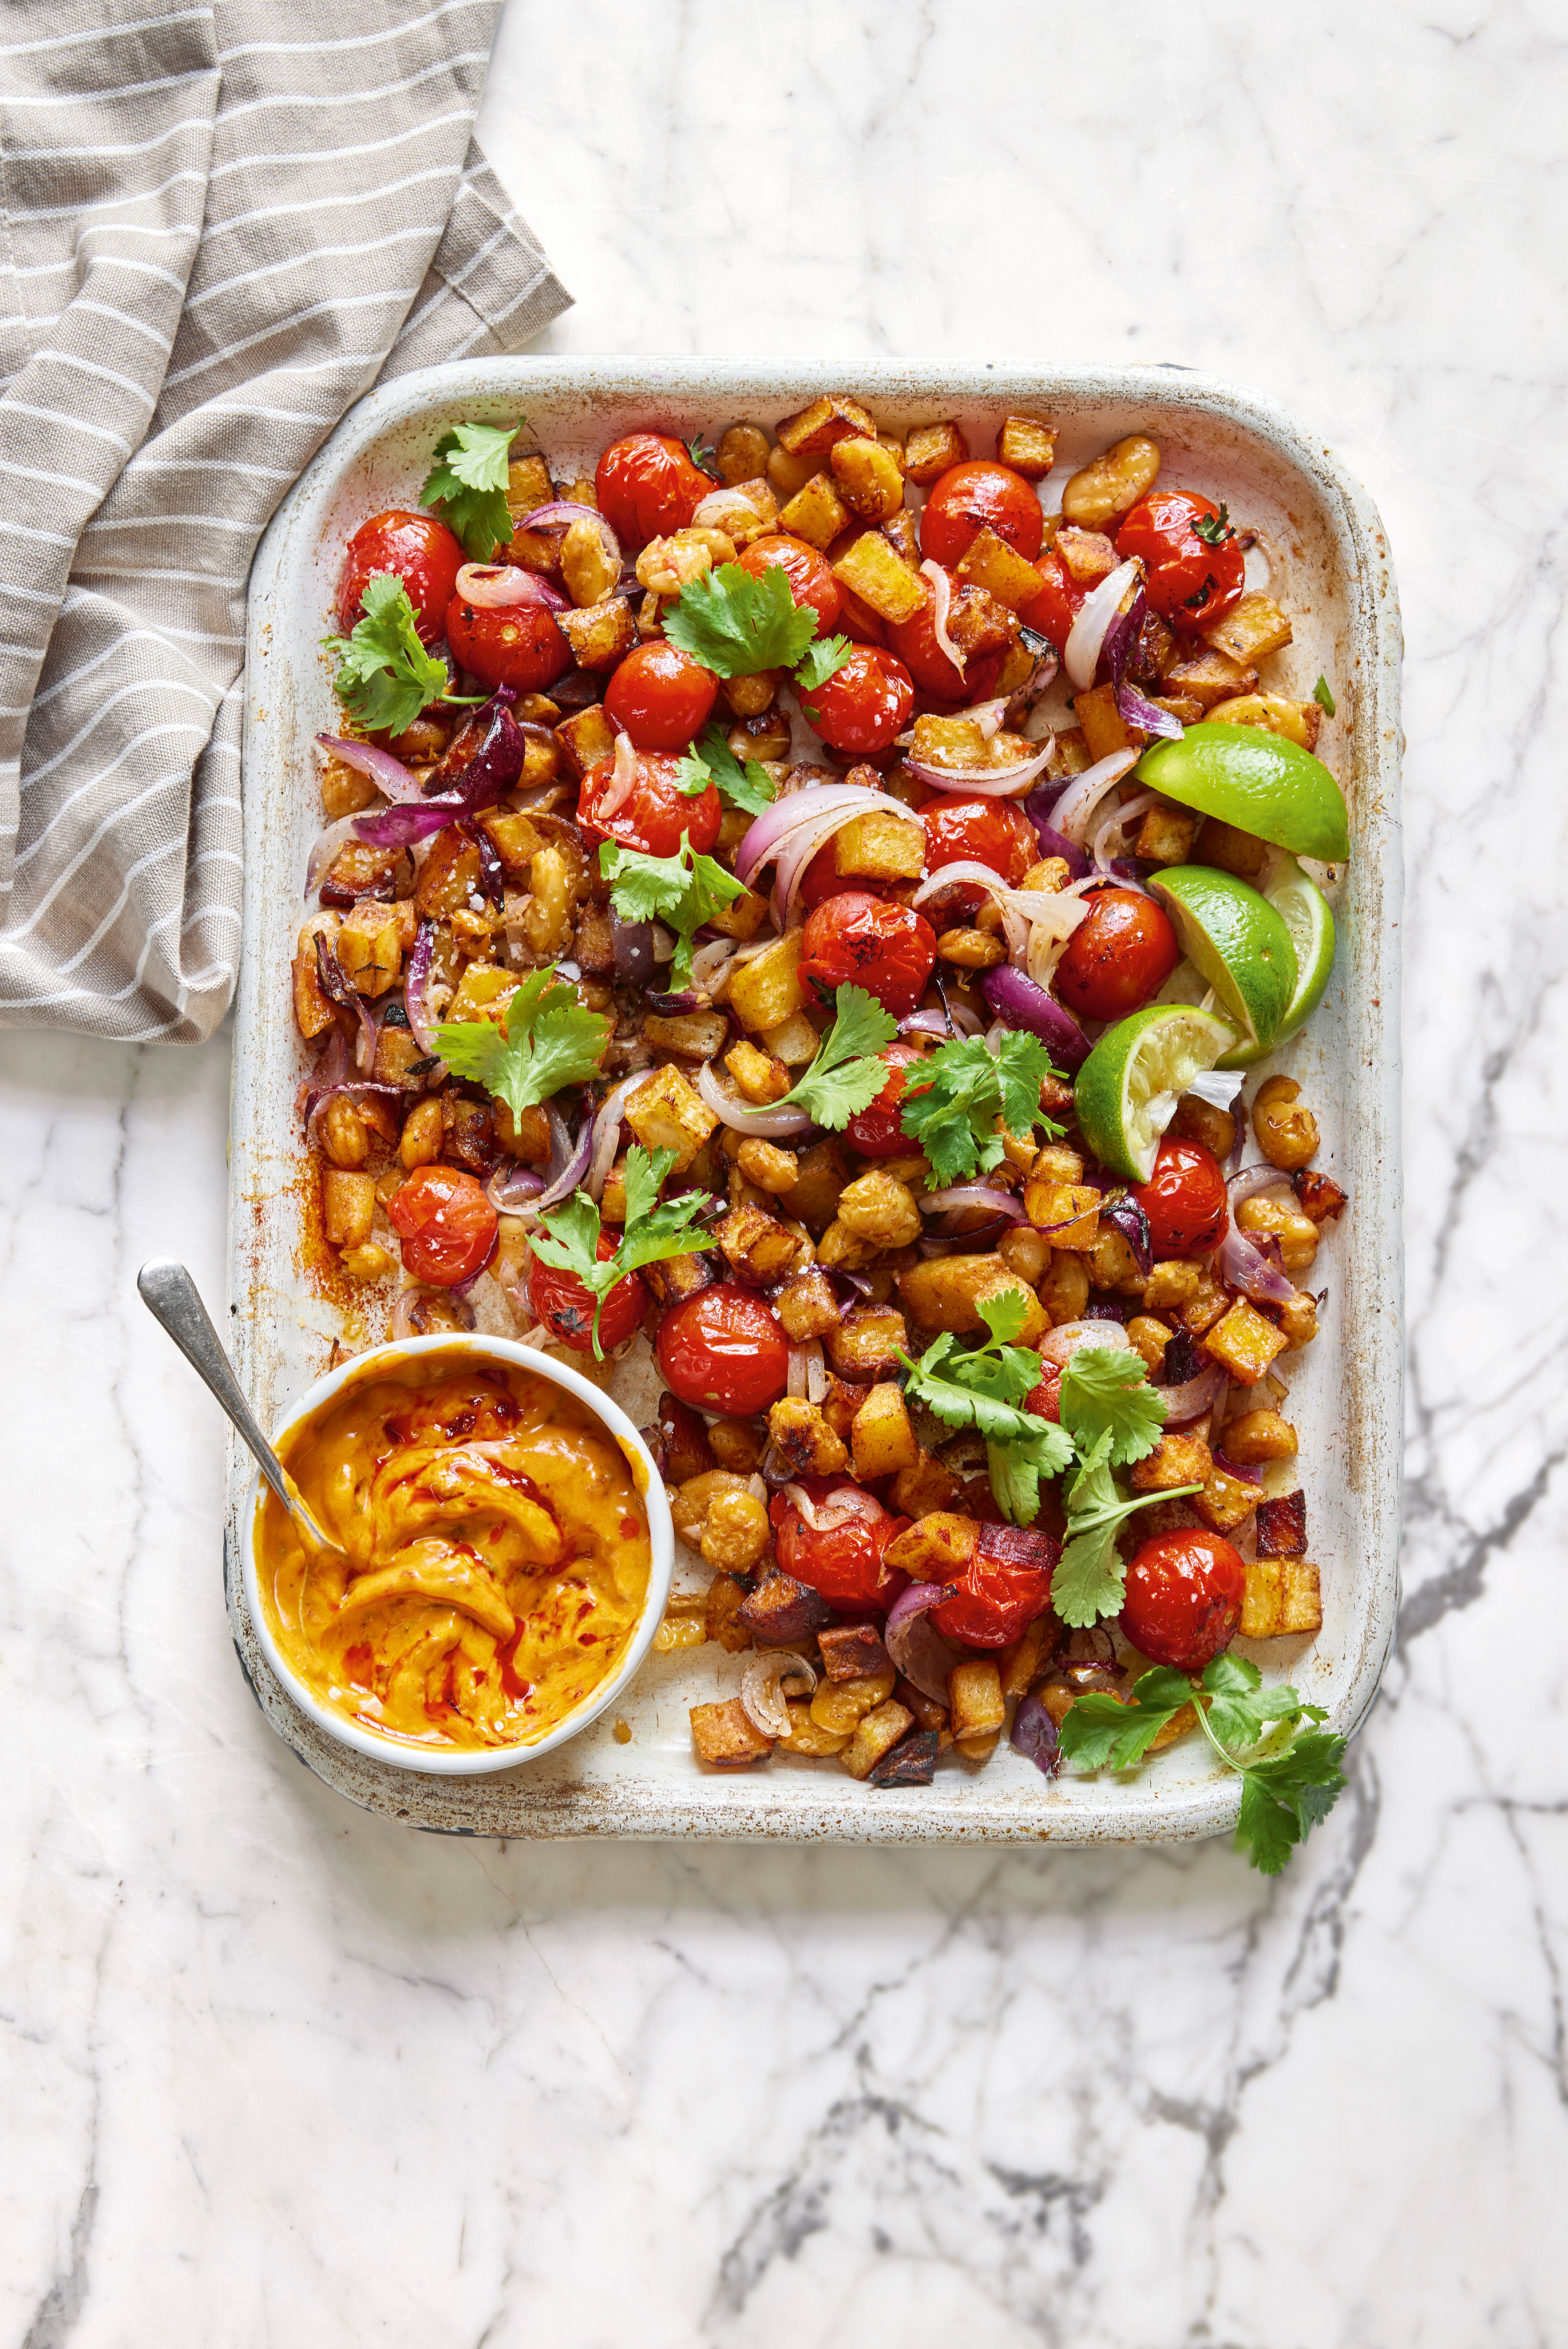 Crispy potato and paprika tray bake from Deliciously Ella: Healthy Made Simple